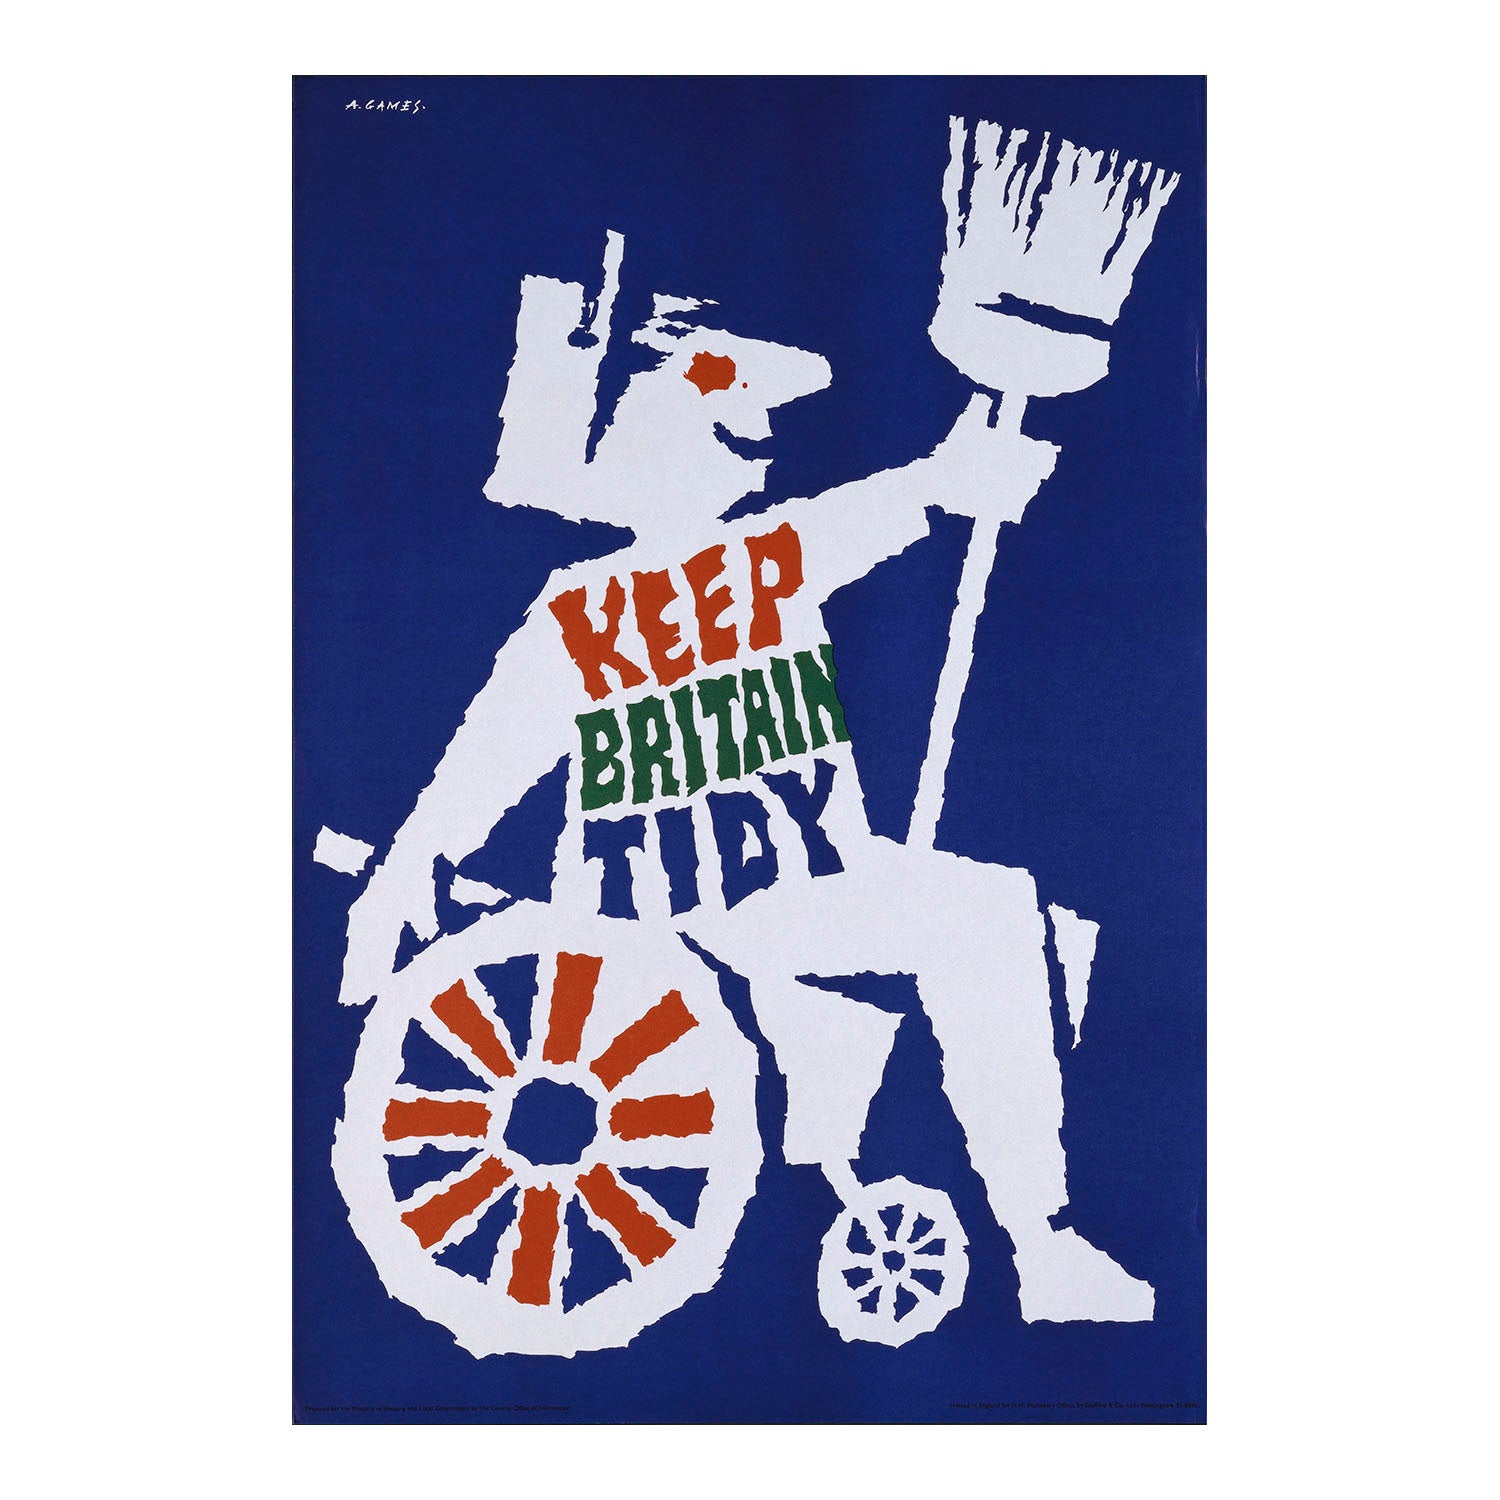 Keep Britain Tidy poster, Abram Games, 1963. Pastiche of Britannia, with a figure seated in a dust cart holding a road brush while the spokes of the wheel cleverly represent the traditional Union Flag shield